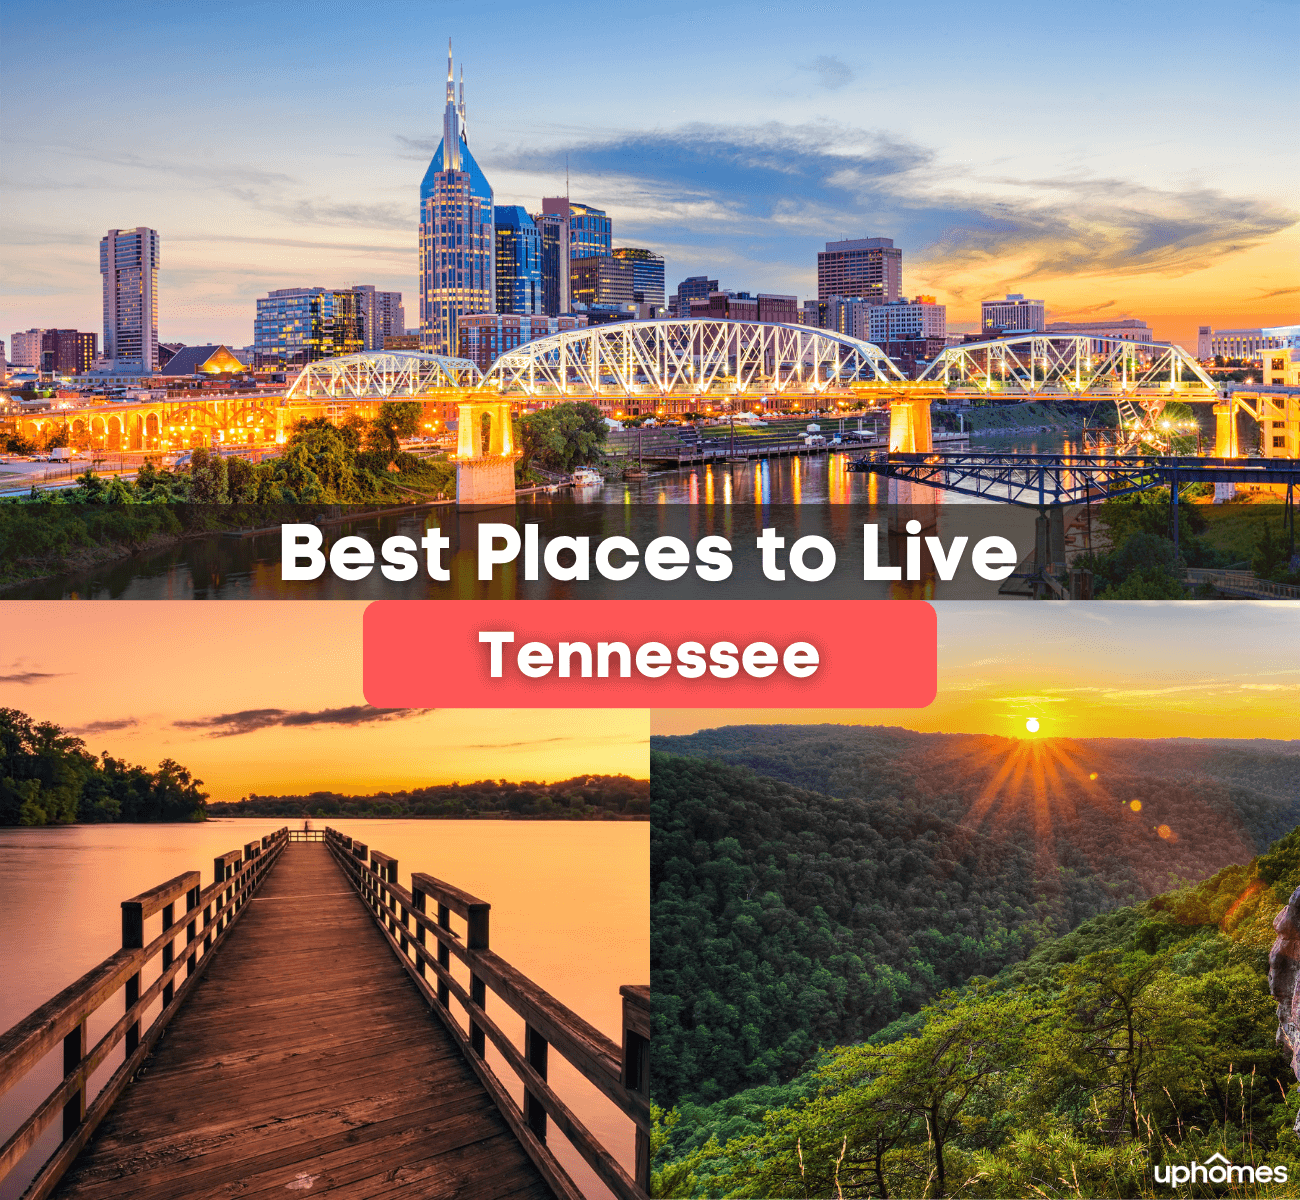 What are the best places to live in the state of Tennessee